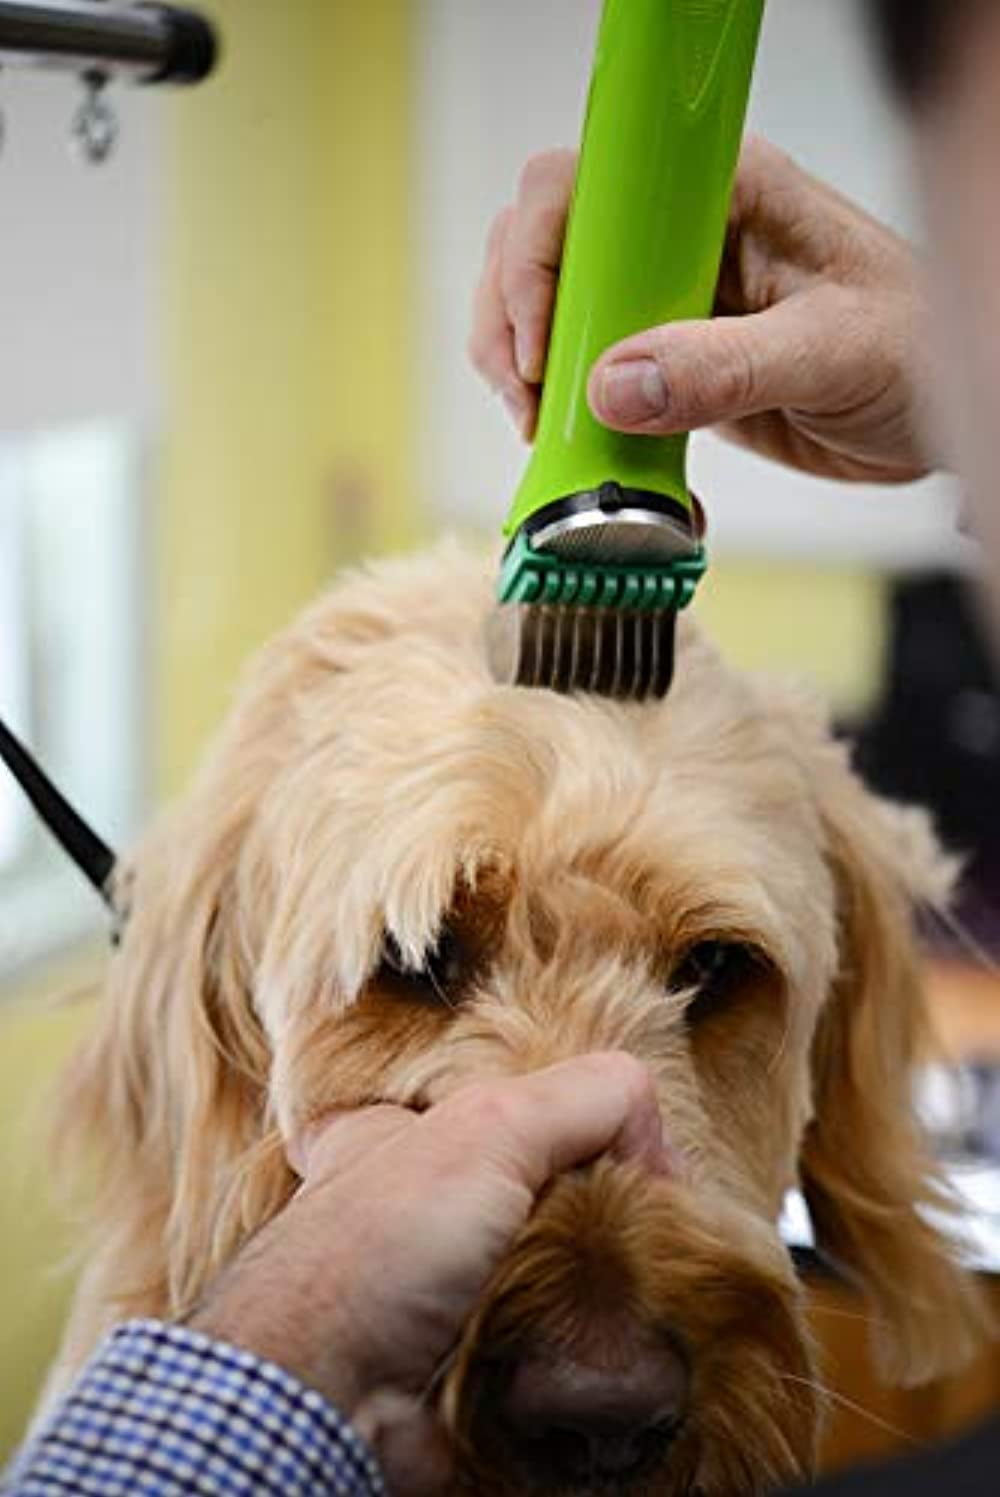 wahl professional animal motion